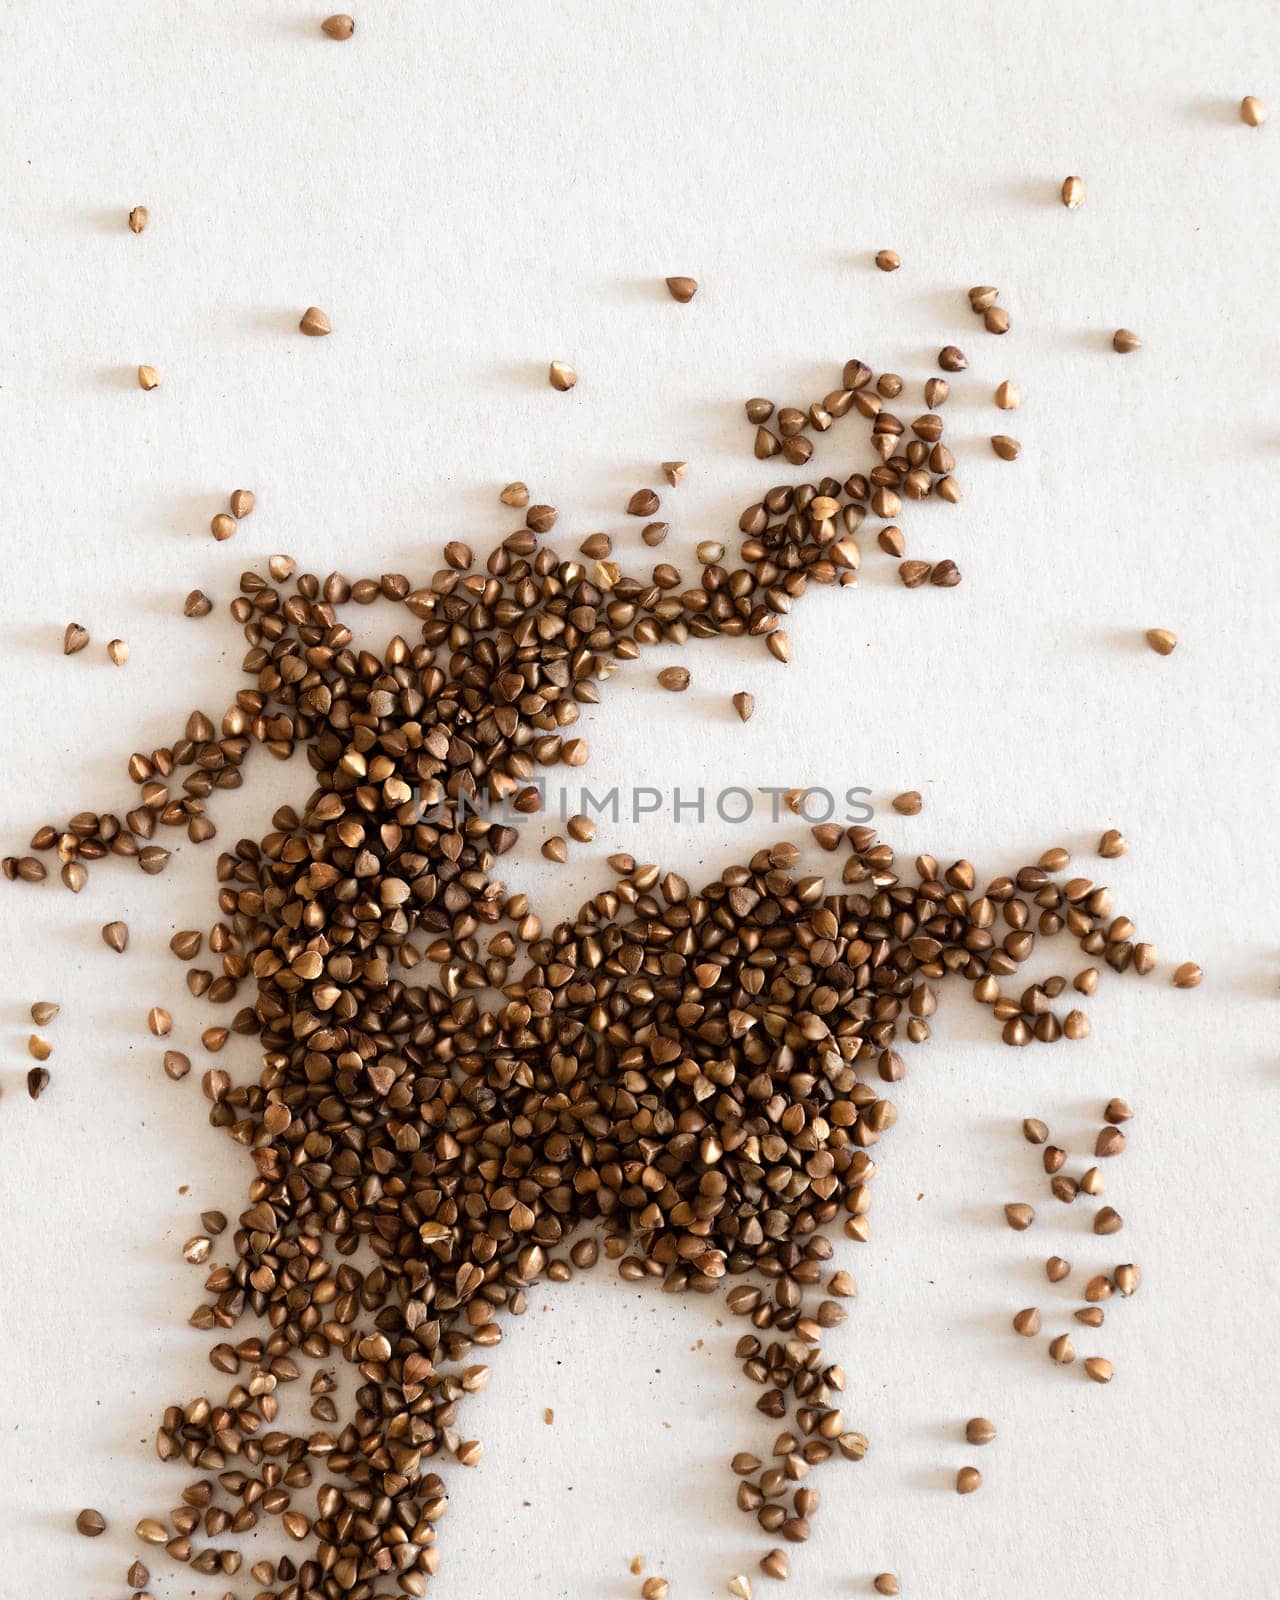 Scattered buckwheat grains on a white background forming abstract patterns by apavlin